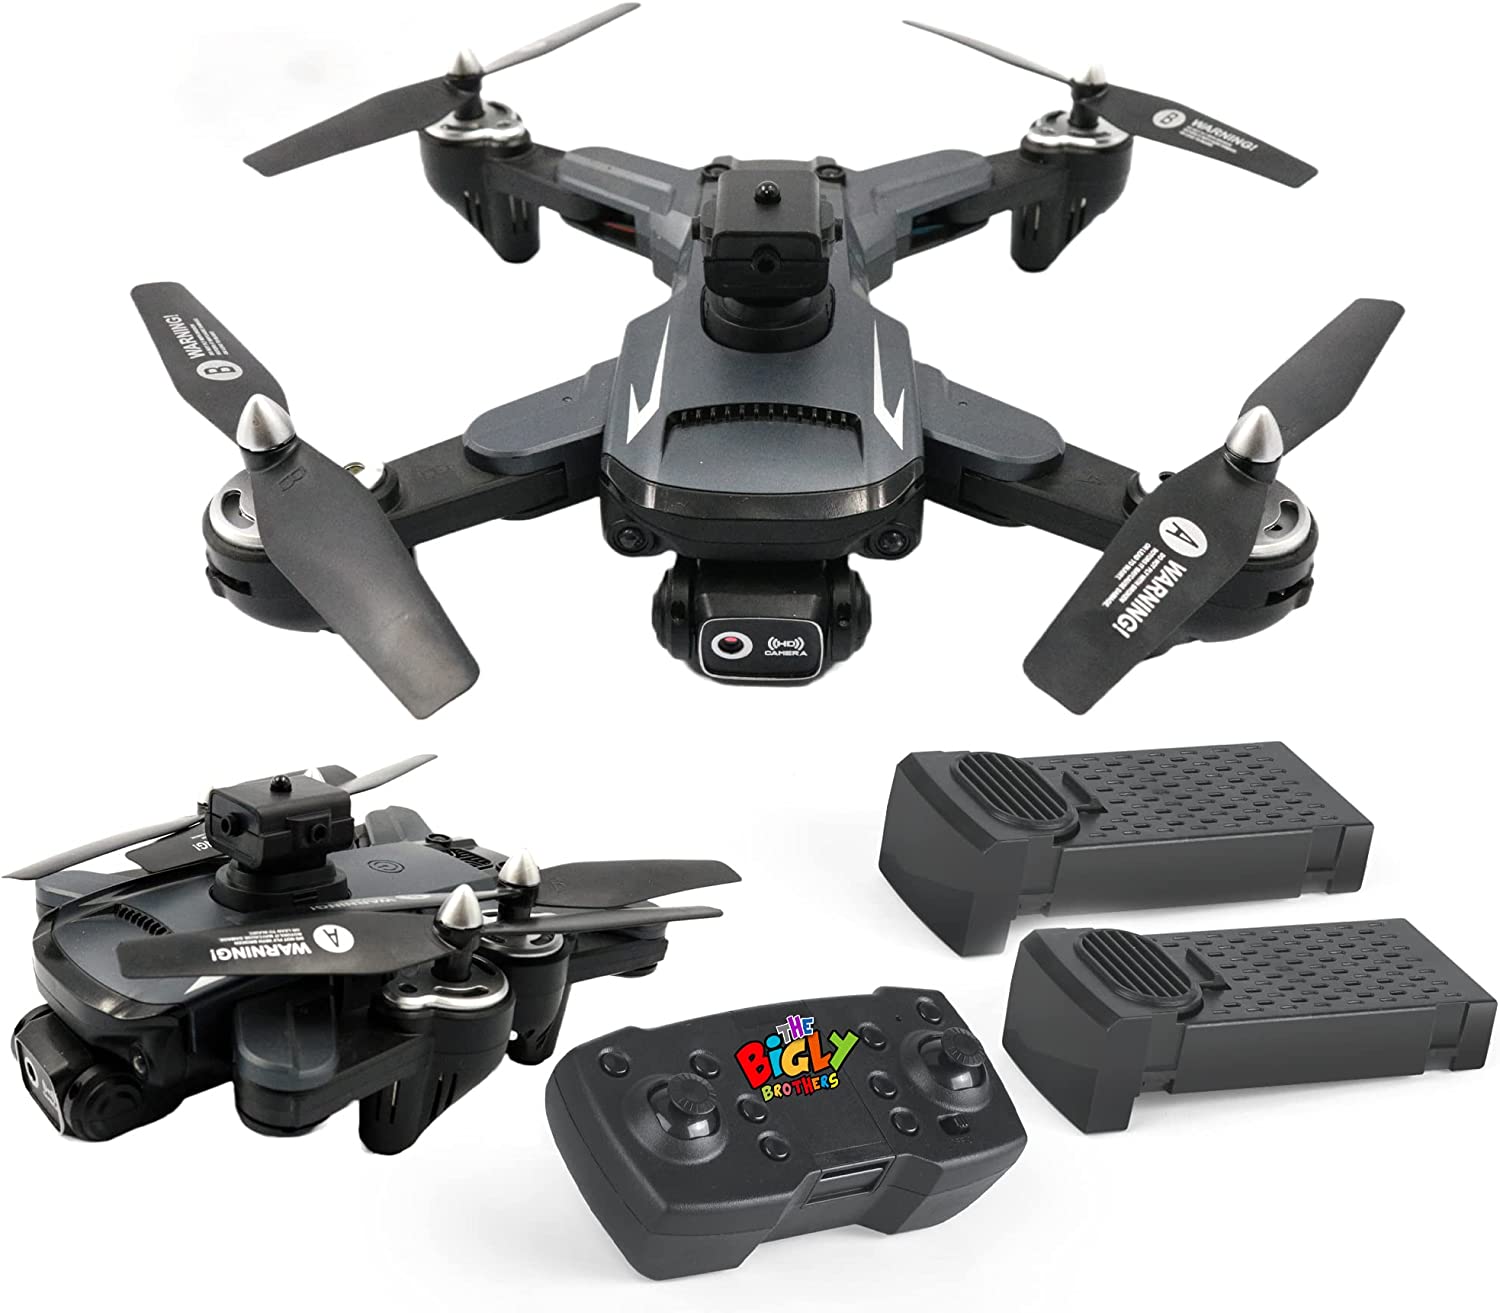 The Bigly Brothers E58 Mark V Extremis 1080P Drone with Camera, Brushless Motors, 360 Degrees of Obstacle Avoidance, 2 Batteries Included, Below 249 Grams, NO ASSEMBLY REQUIRED, Ready to Fly! – Black